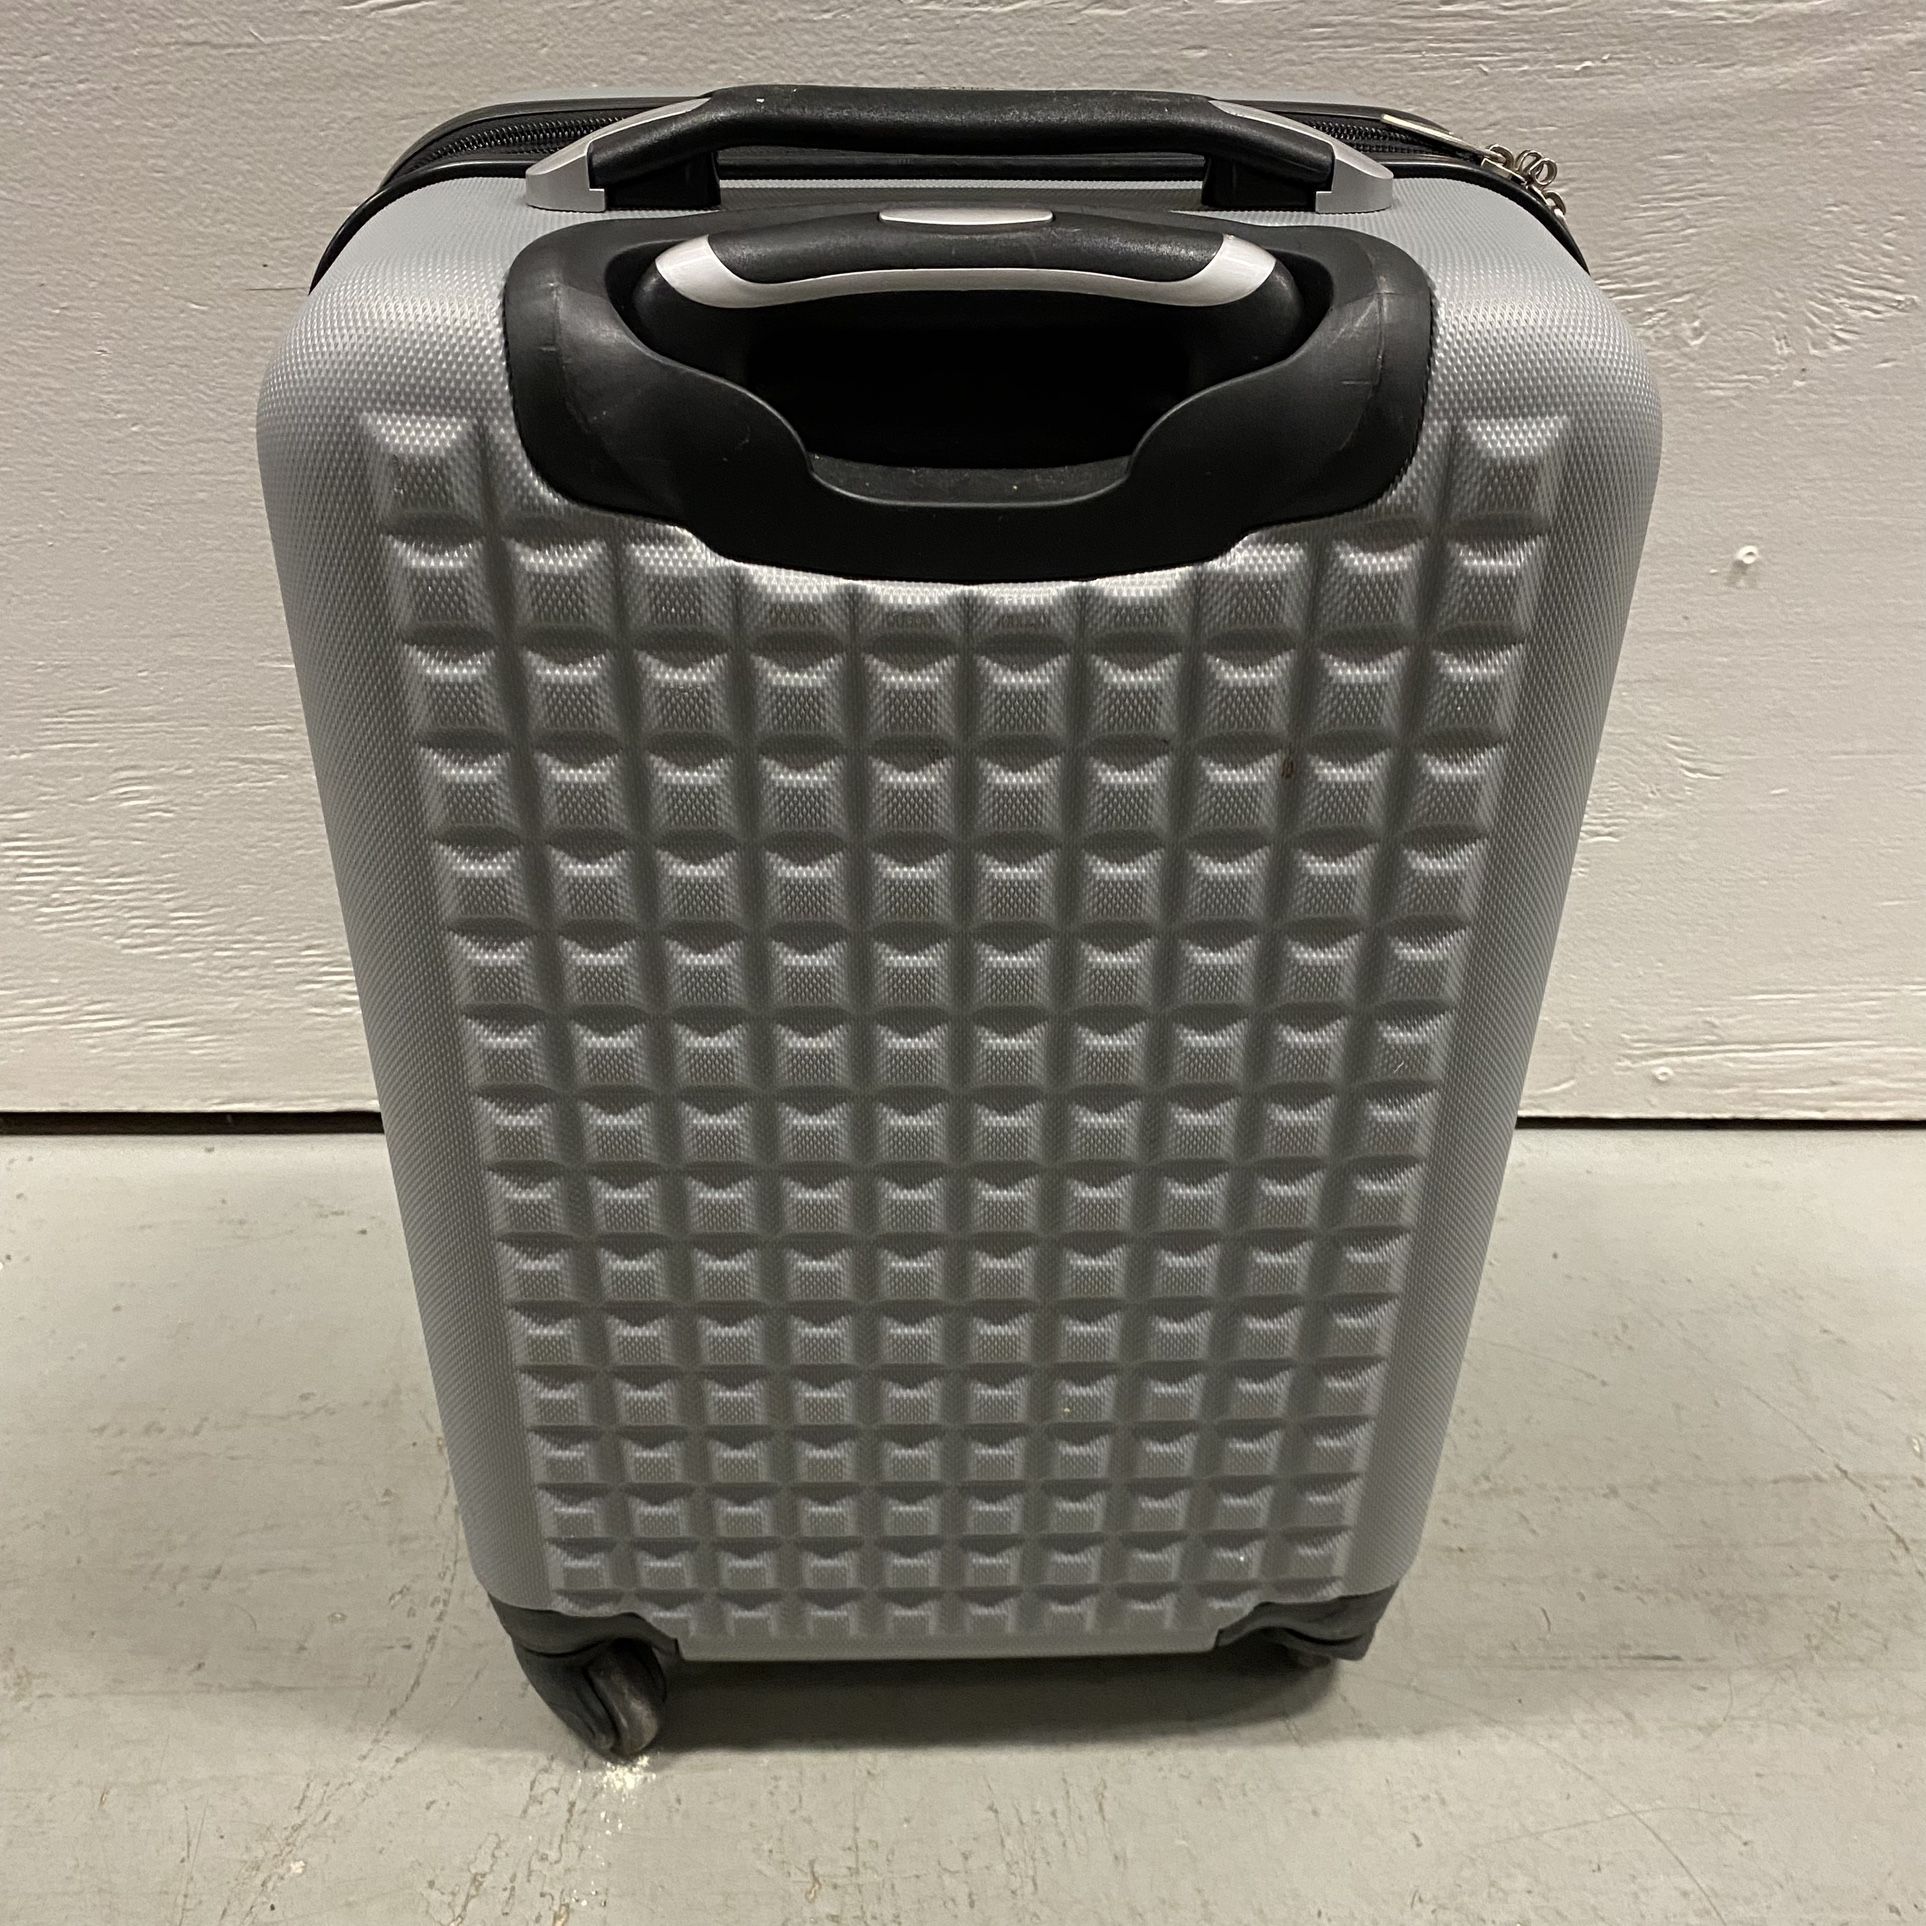 Samsonite Light Gray Hard Shell 4-Wheel Spinner with Black accents Carry-on Suitcase Travel Bag Luggage